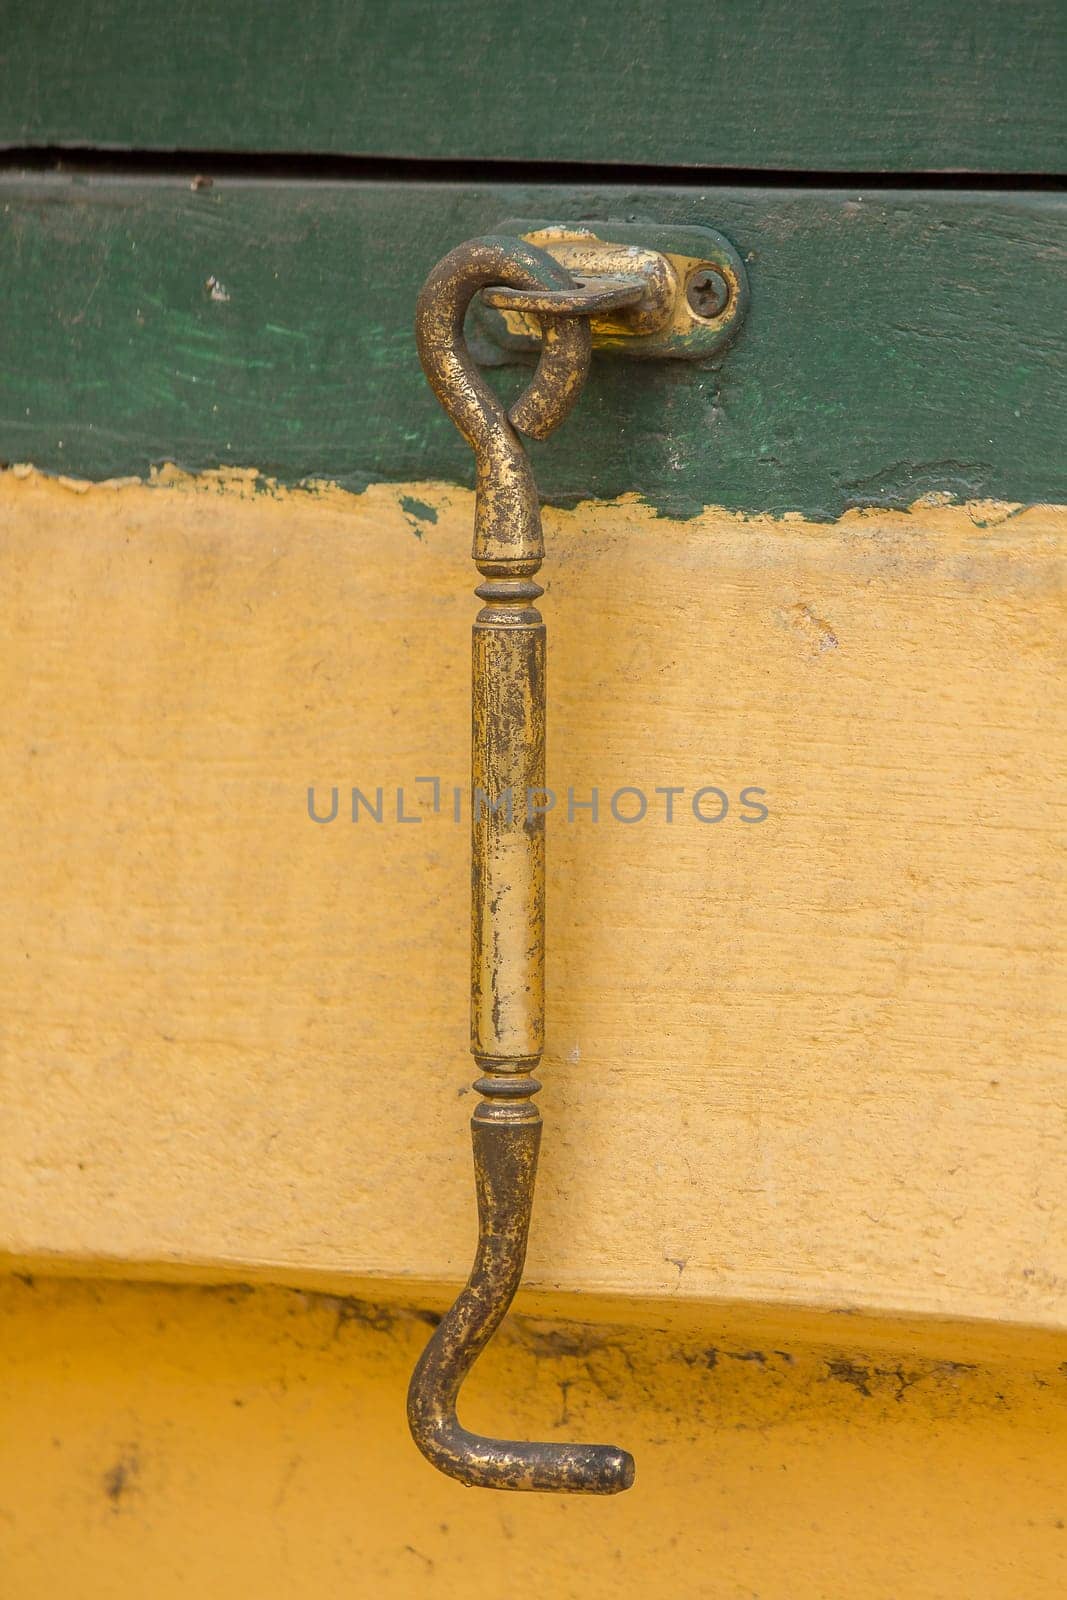 hook old brass window Used to attach doors or windows